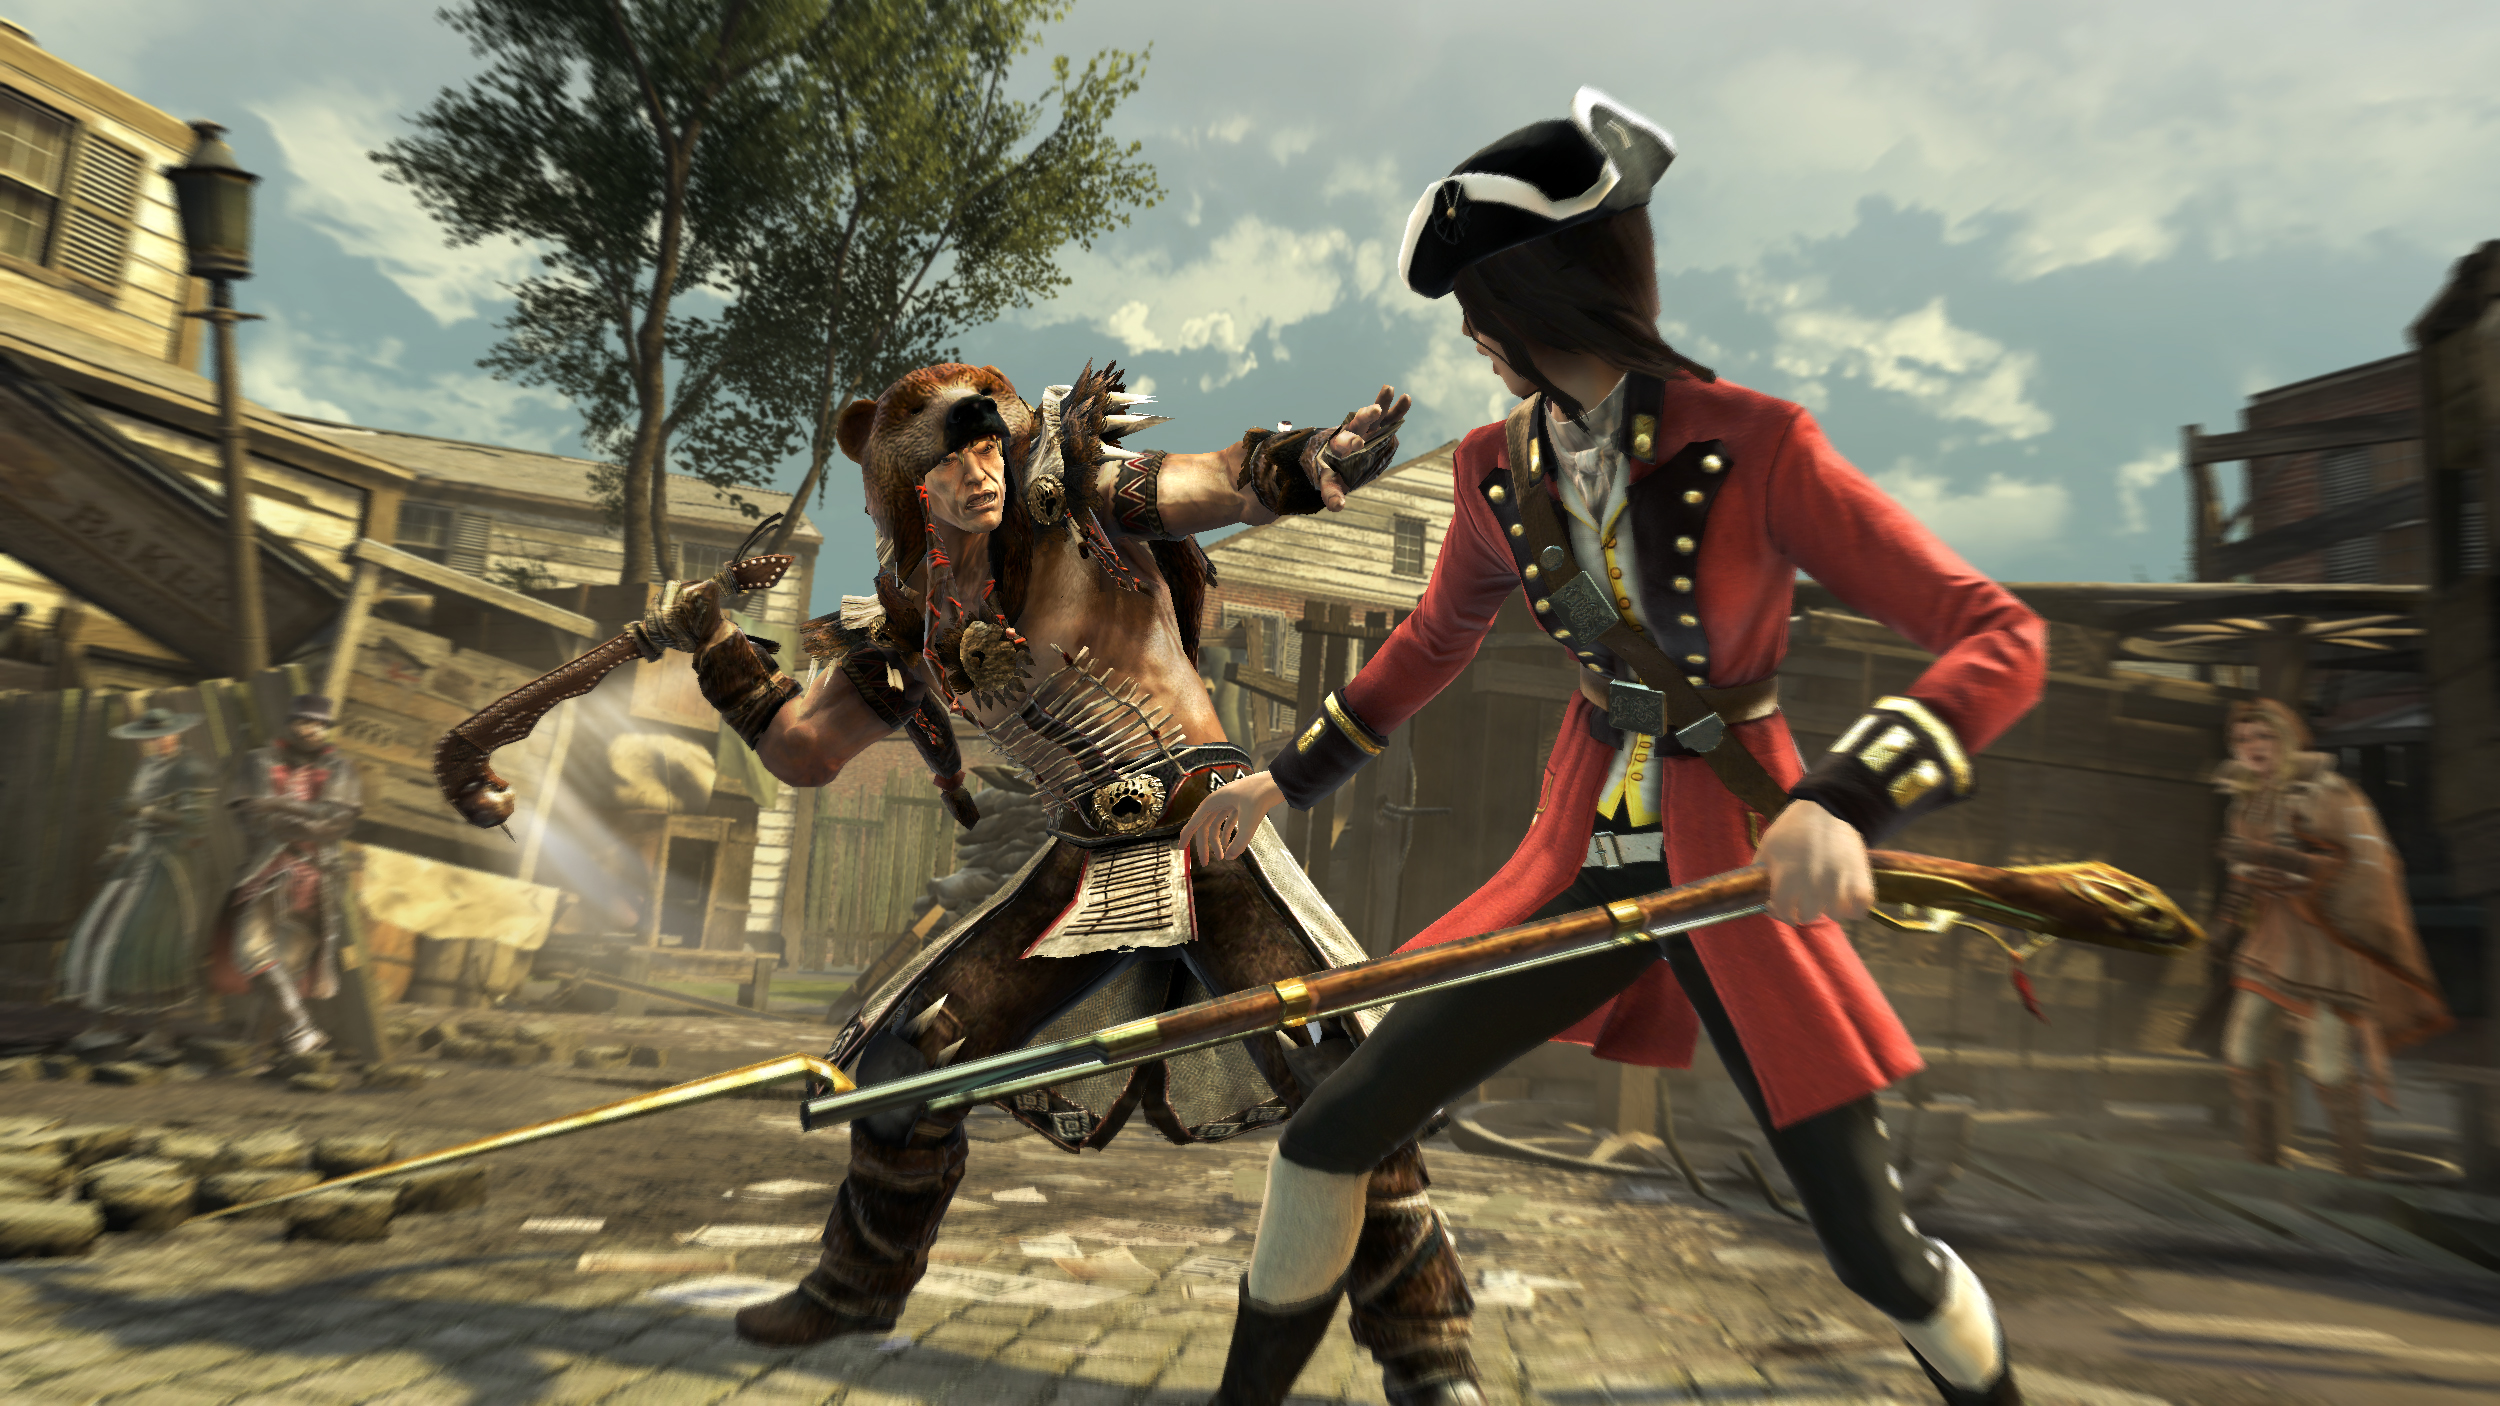 Games for 3 people. Ассасин Крид 3. Assassin’s Creed III – 2012. Assassin s Creed игра 3. Assassins Creed 1 3.